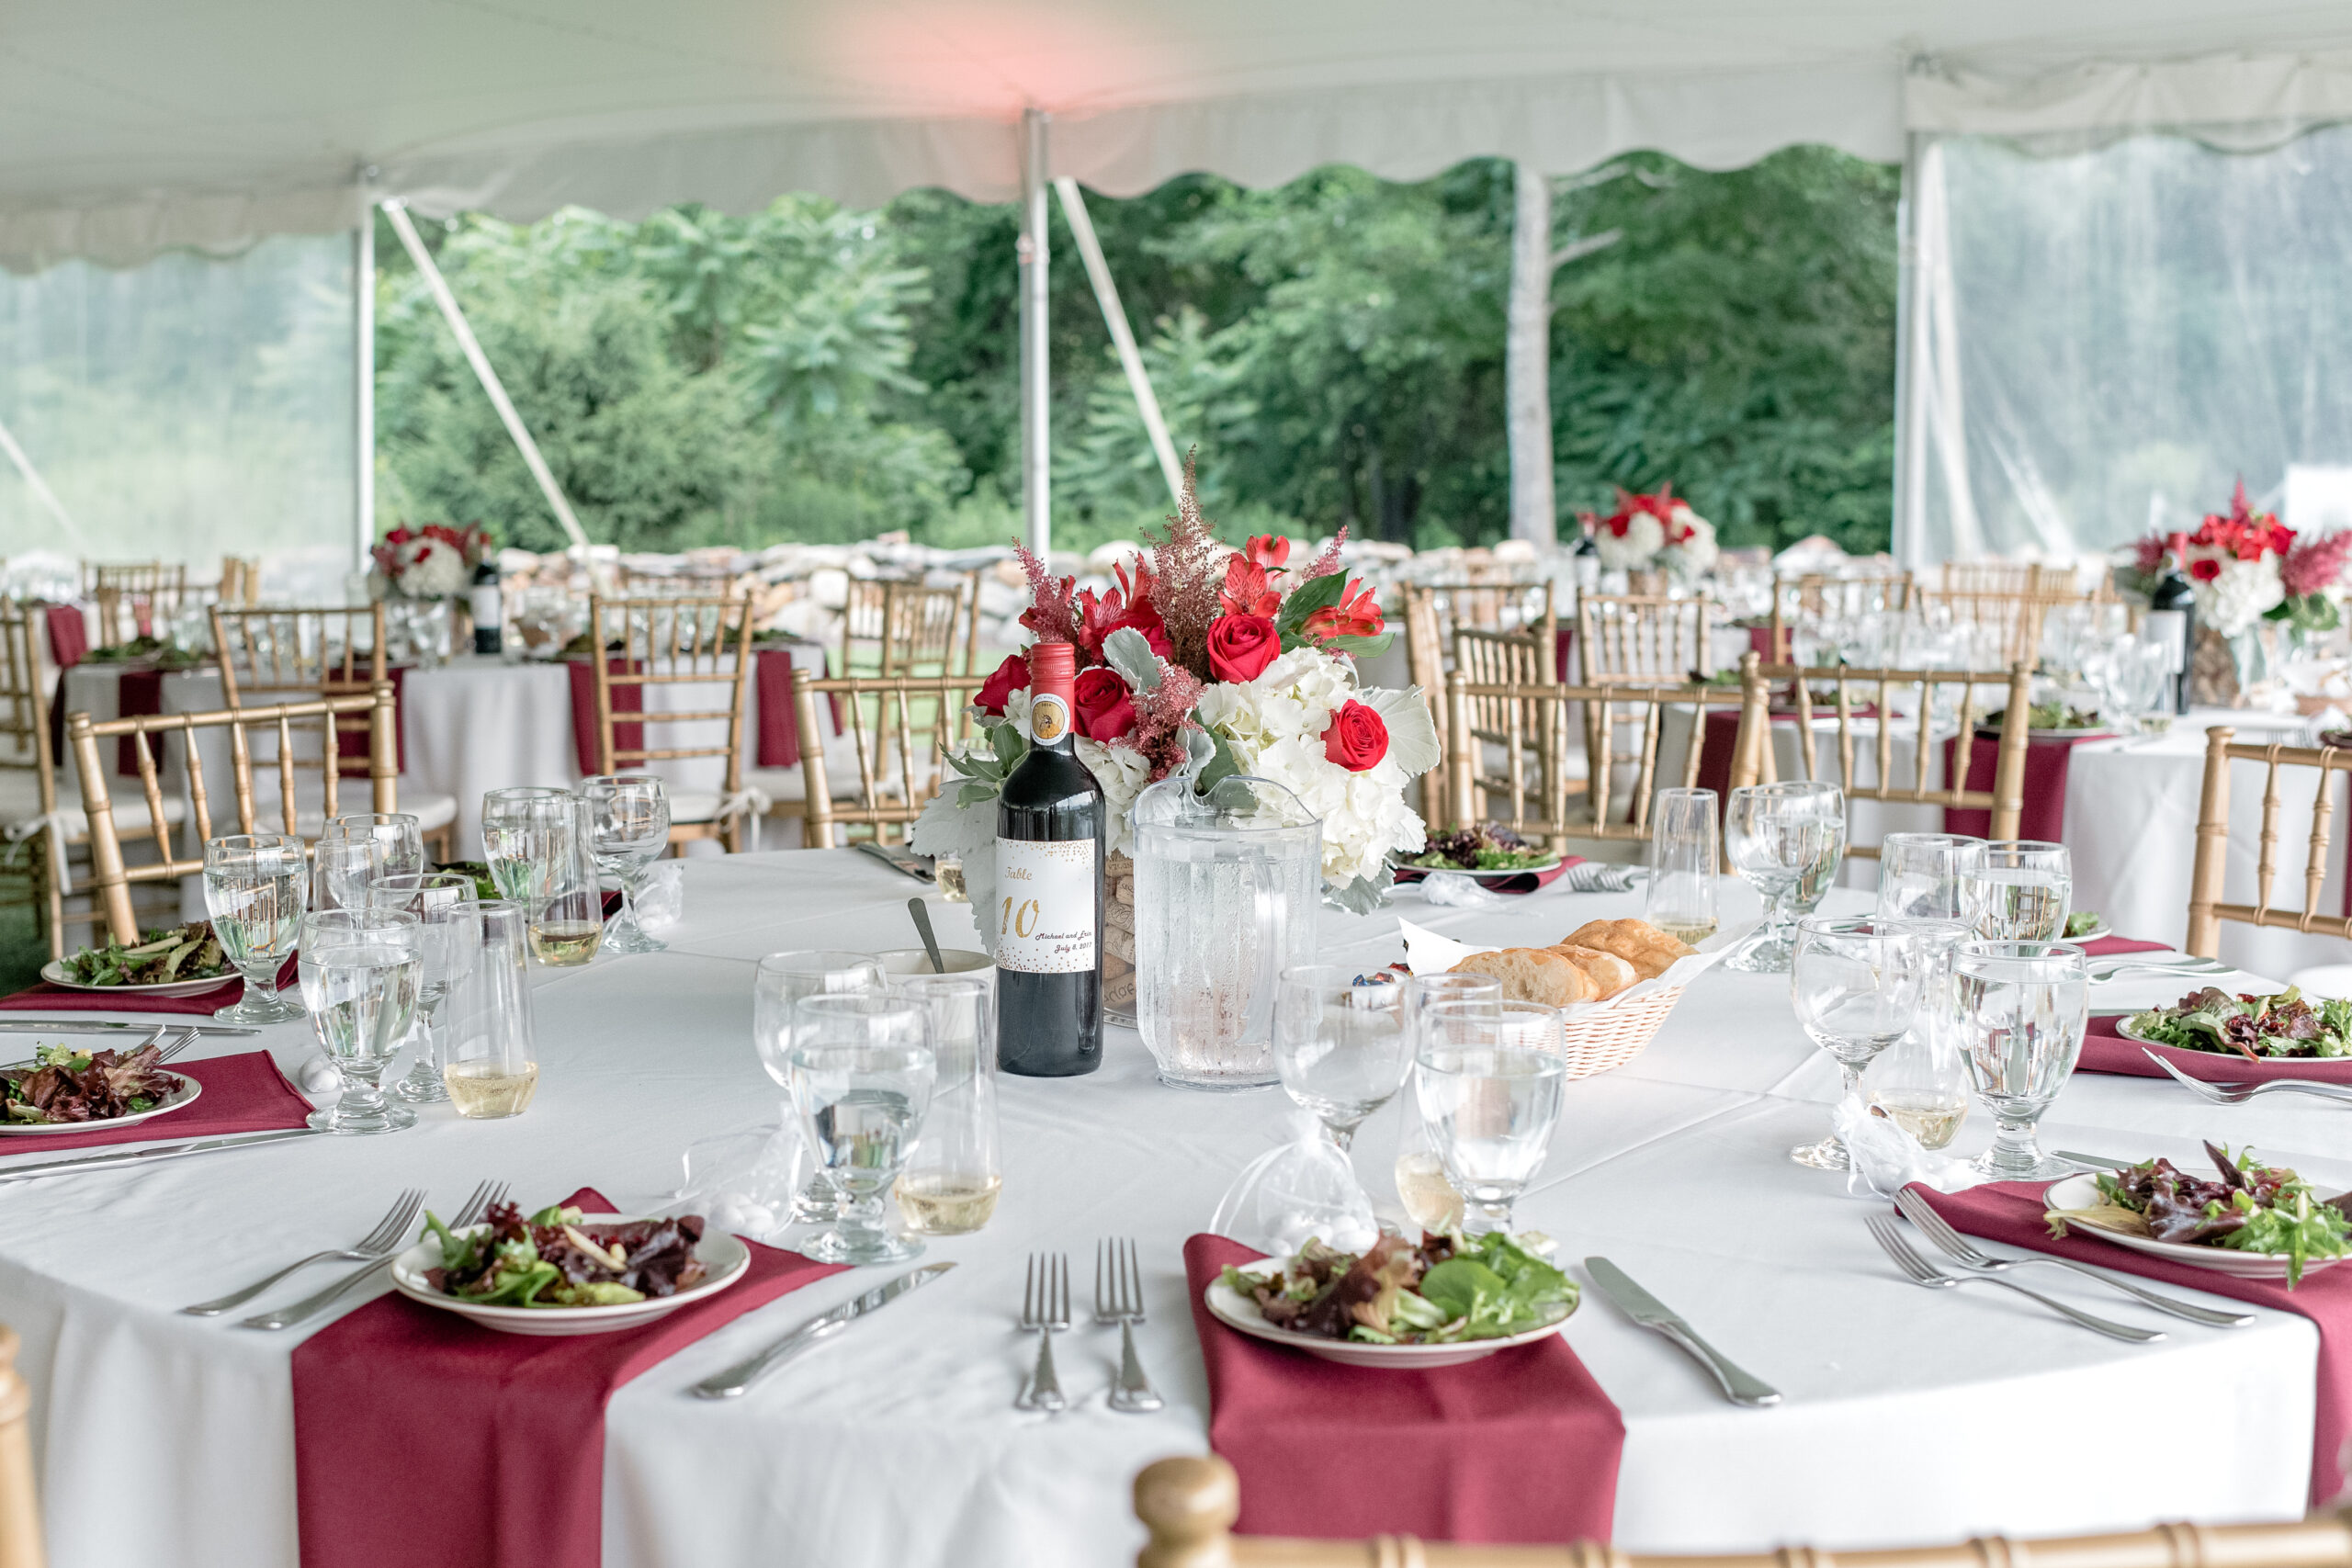 The tent space at Preston Ride Vineyard is bright and airy allowing for the pops of color in the decor to stand out. 